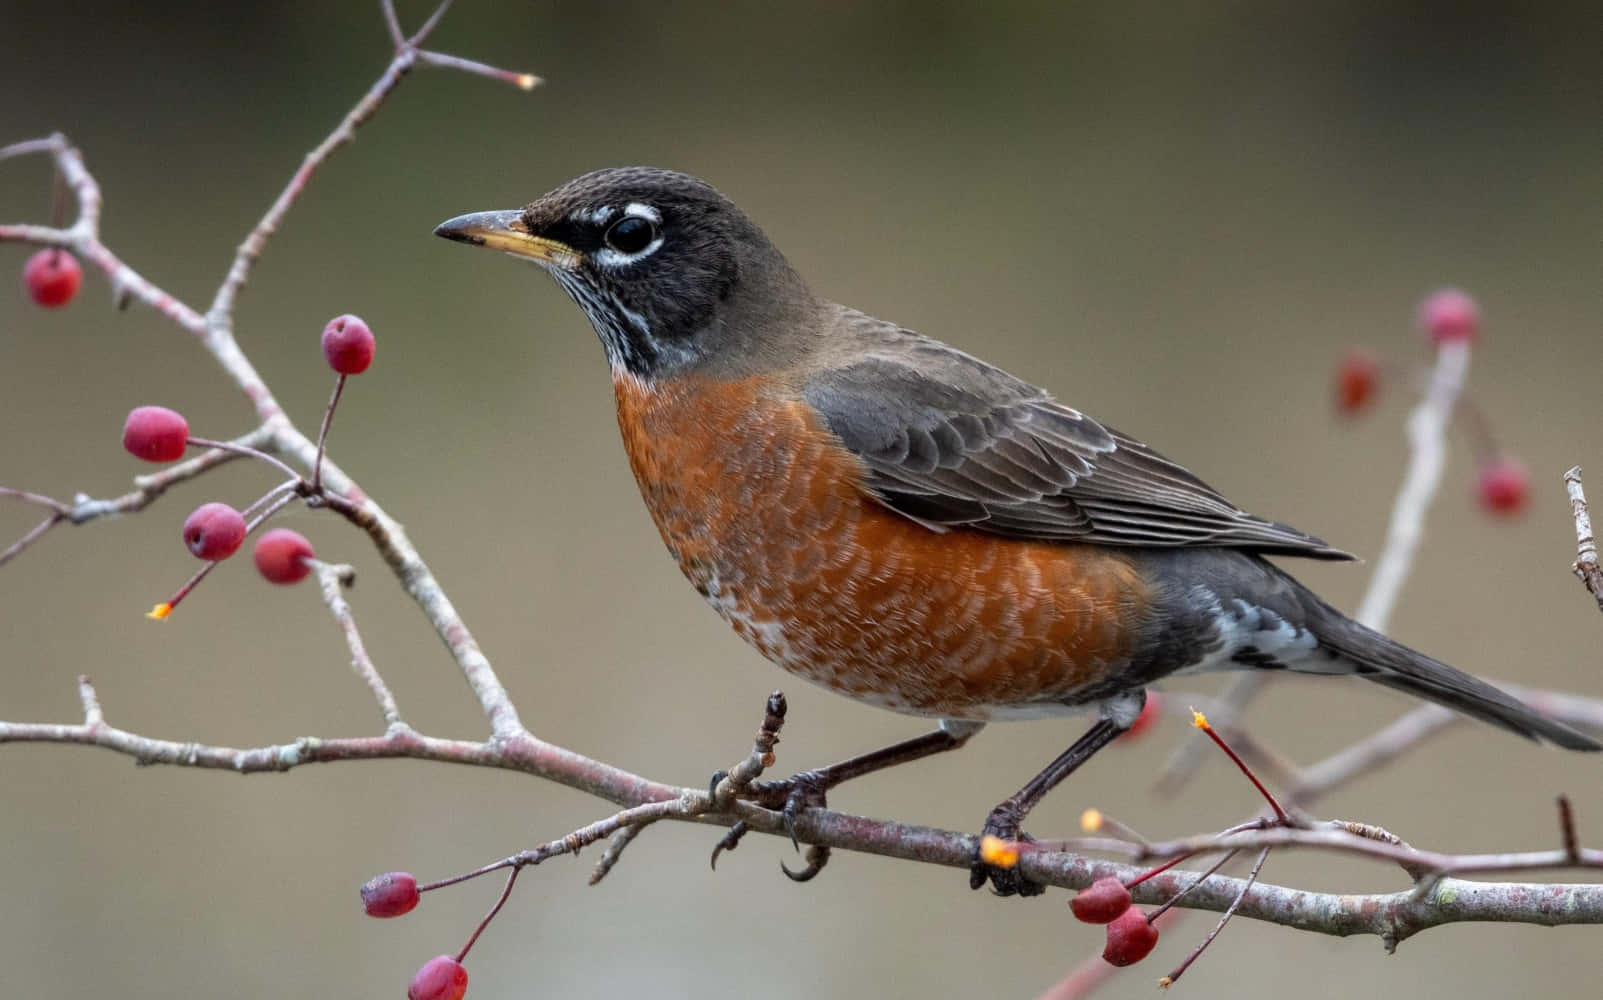 The beauty of the robin will captivate your heart.